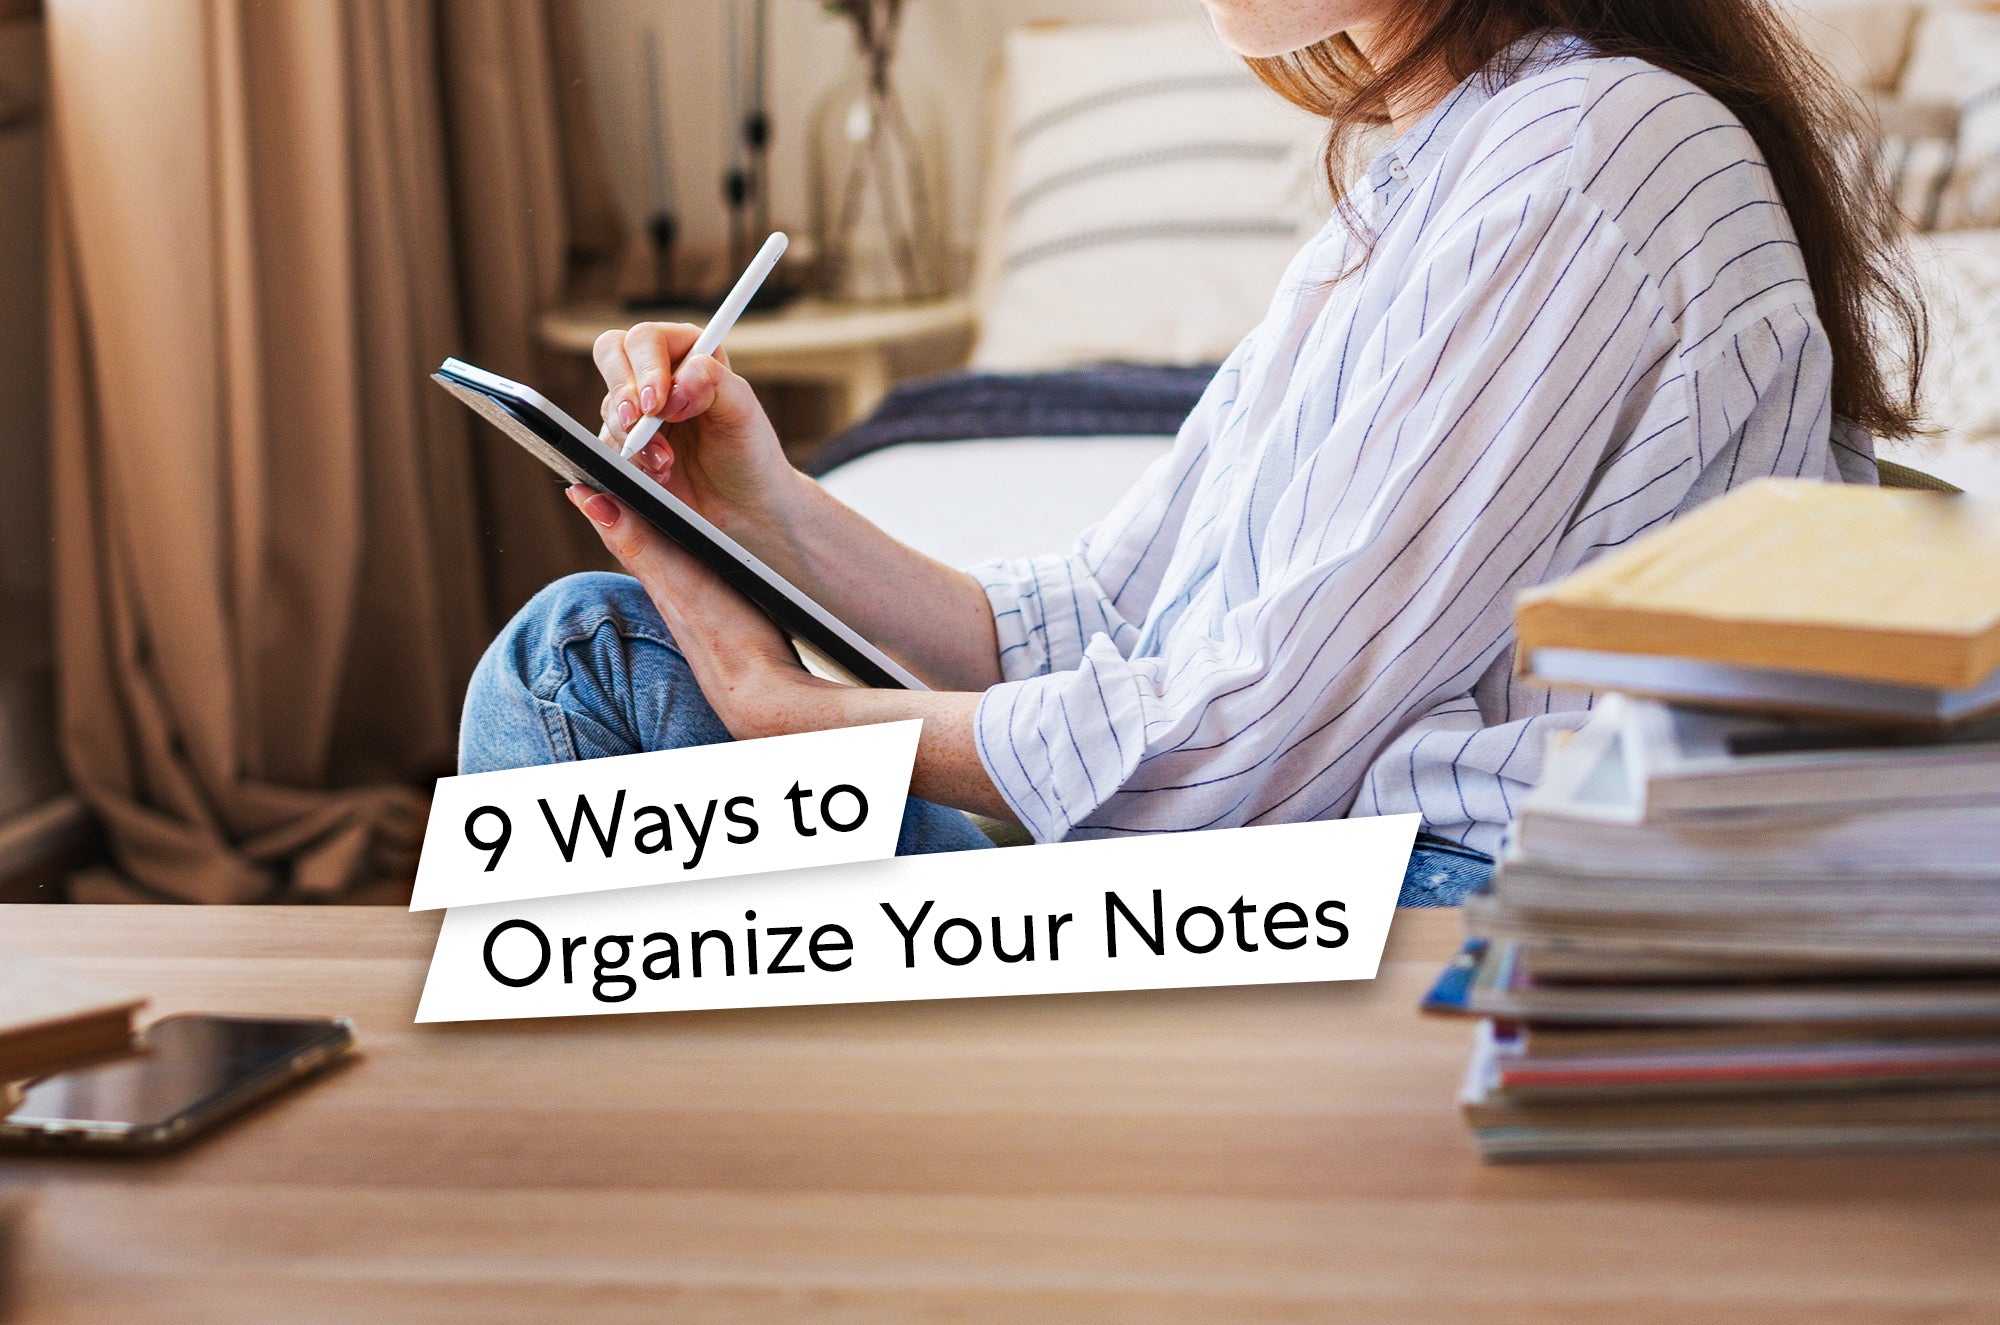 5 tips to show how Apple Notes can organize, scan a document and